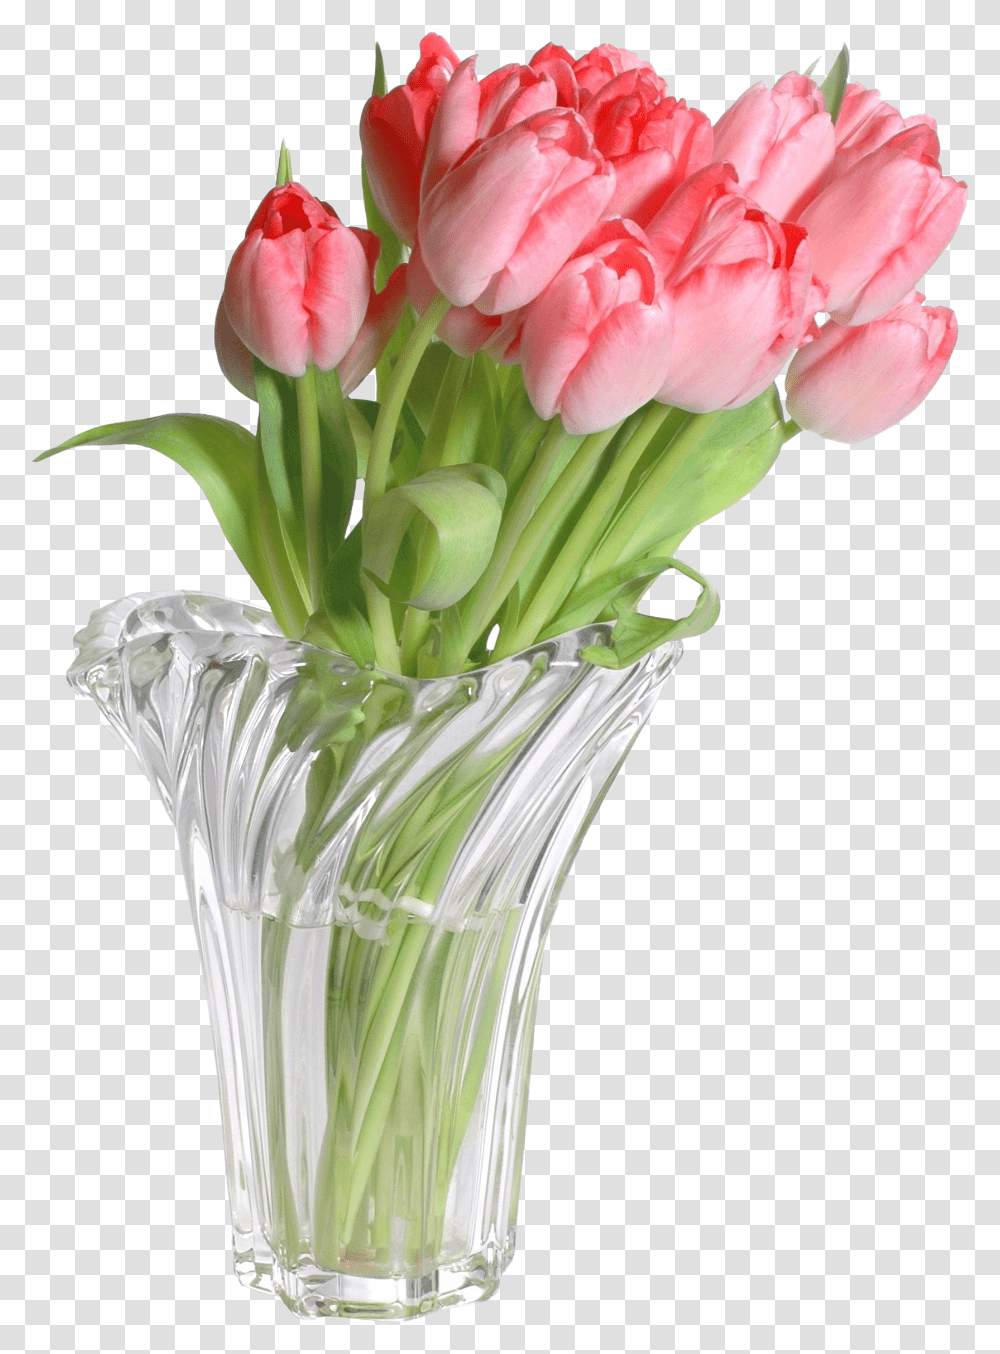 Flower Vases With Bible Verses Flowers In Vase Transparent Png